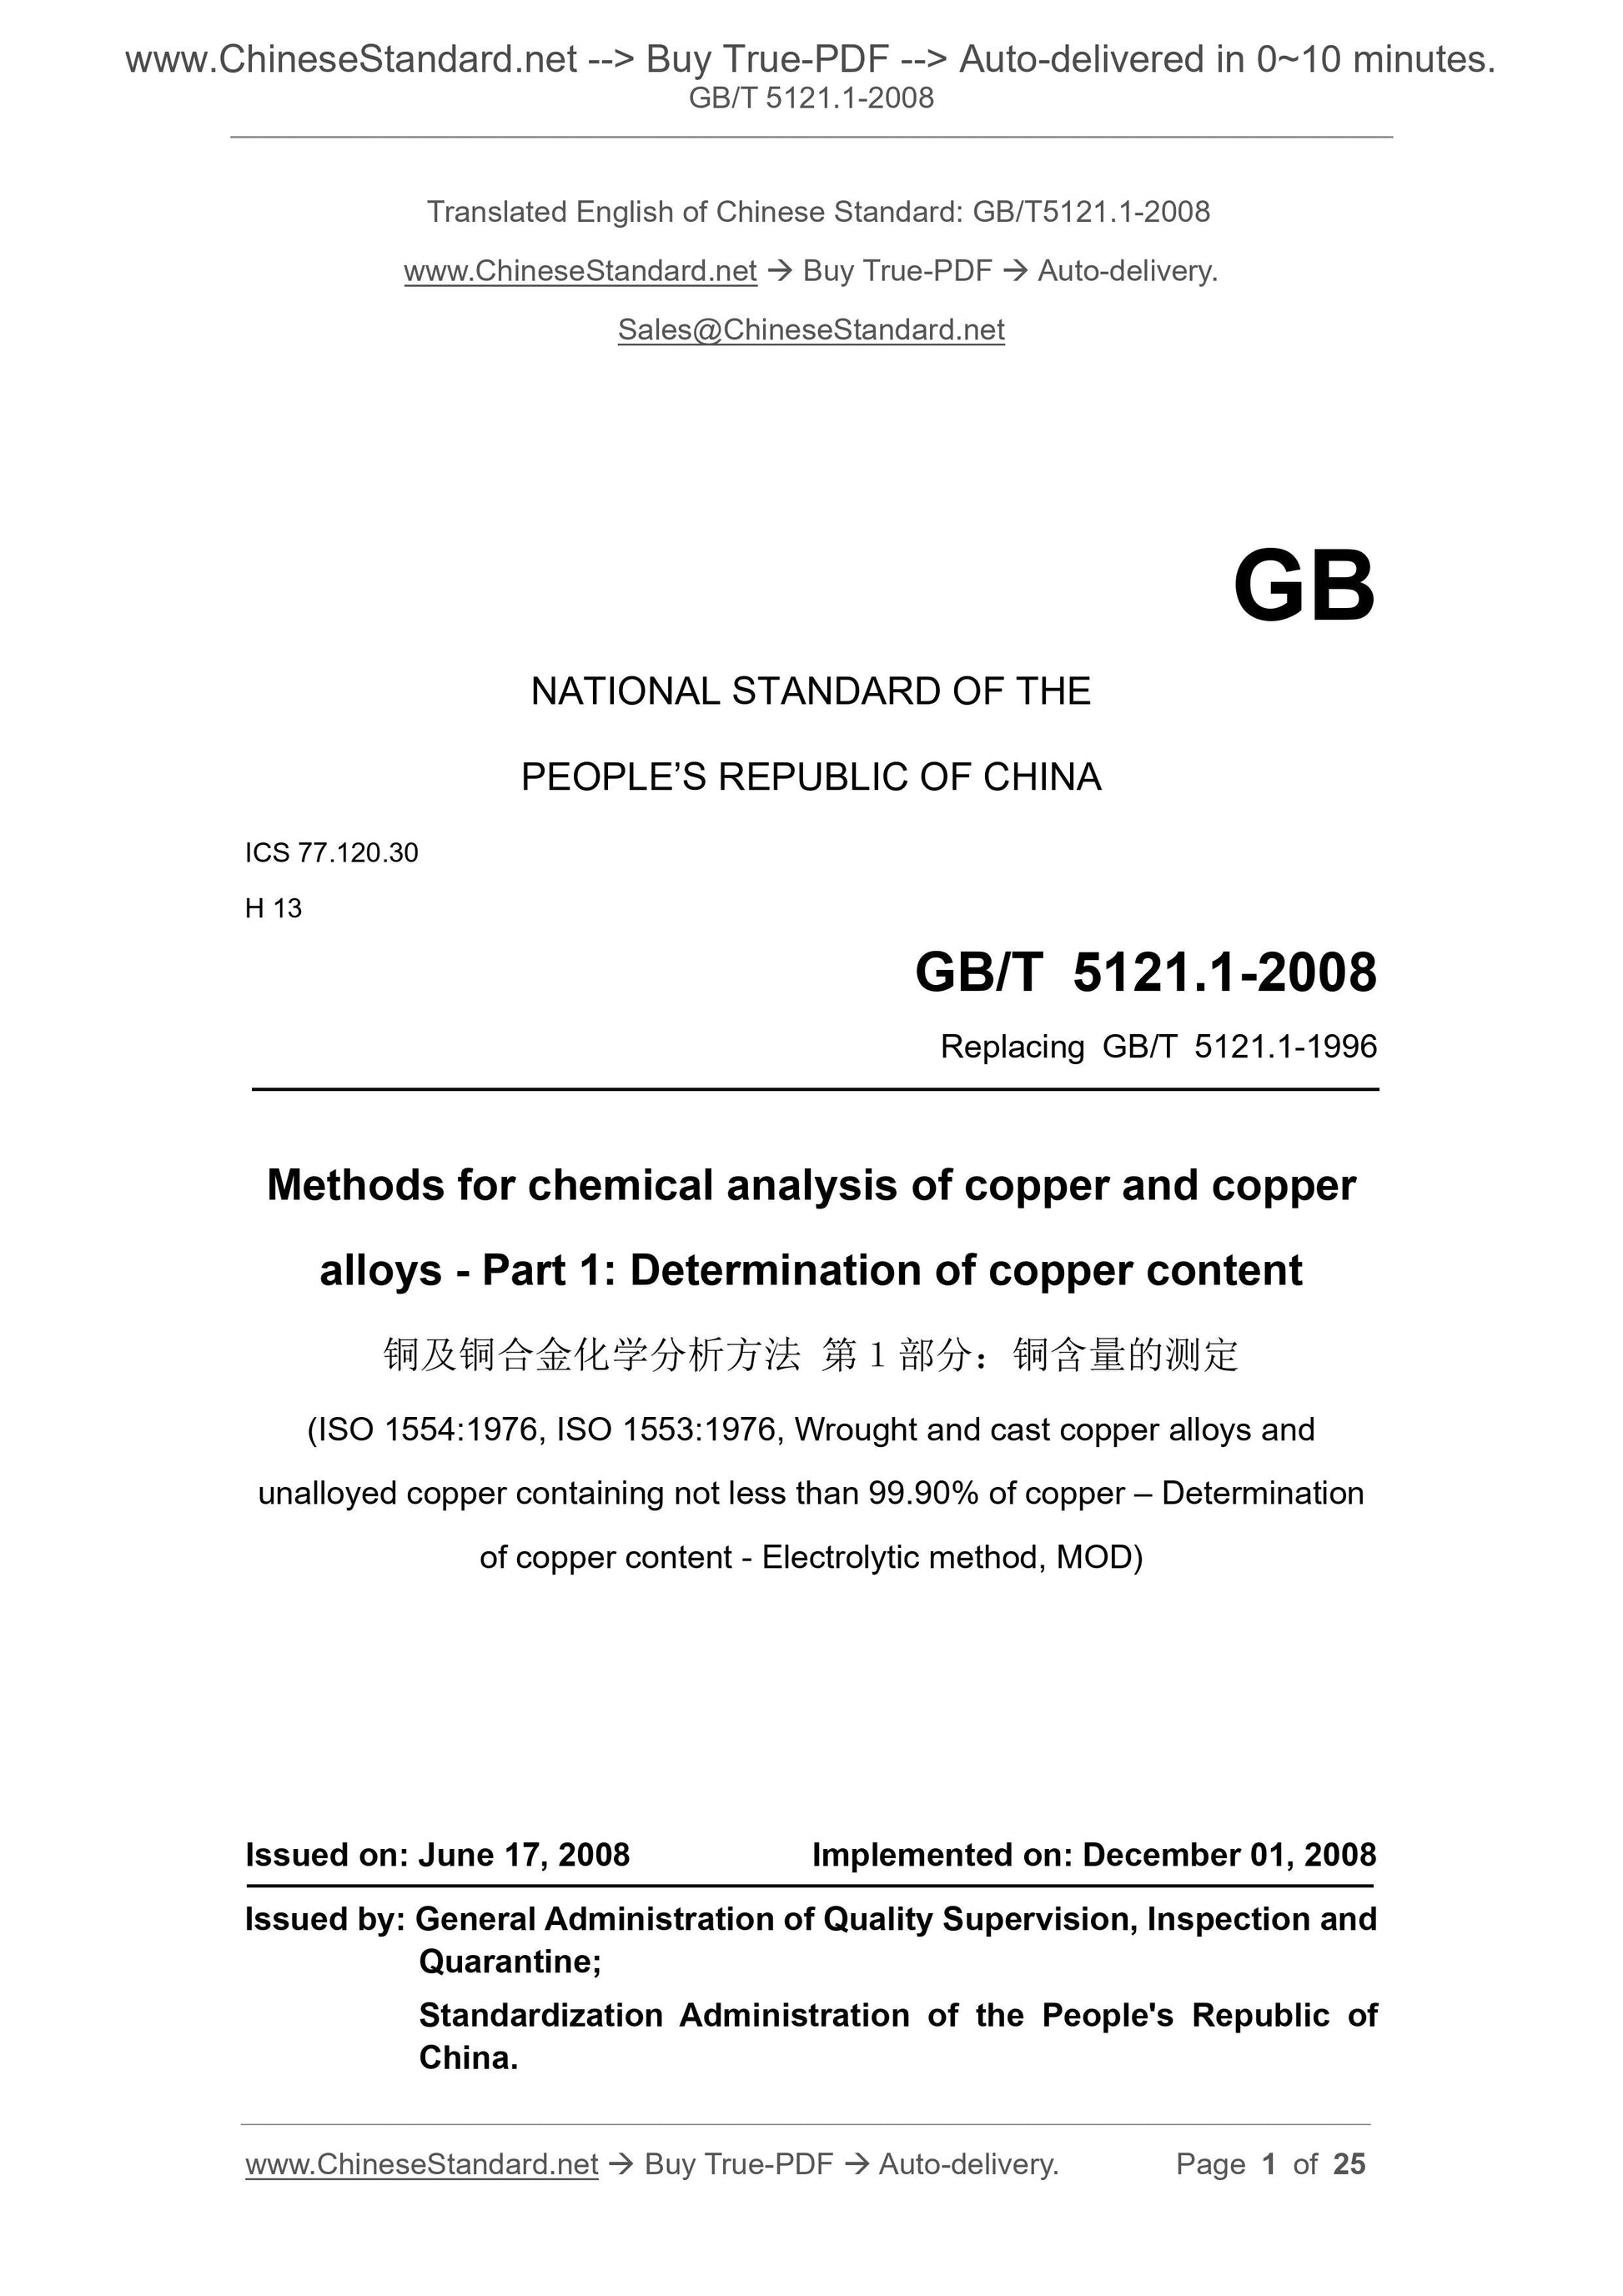 GB/T 5121.1-2008 Page 1